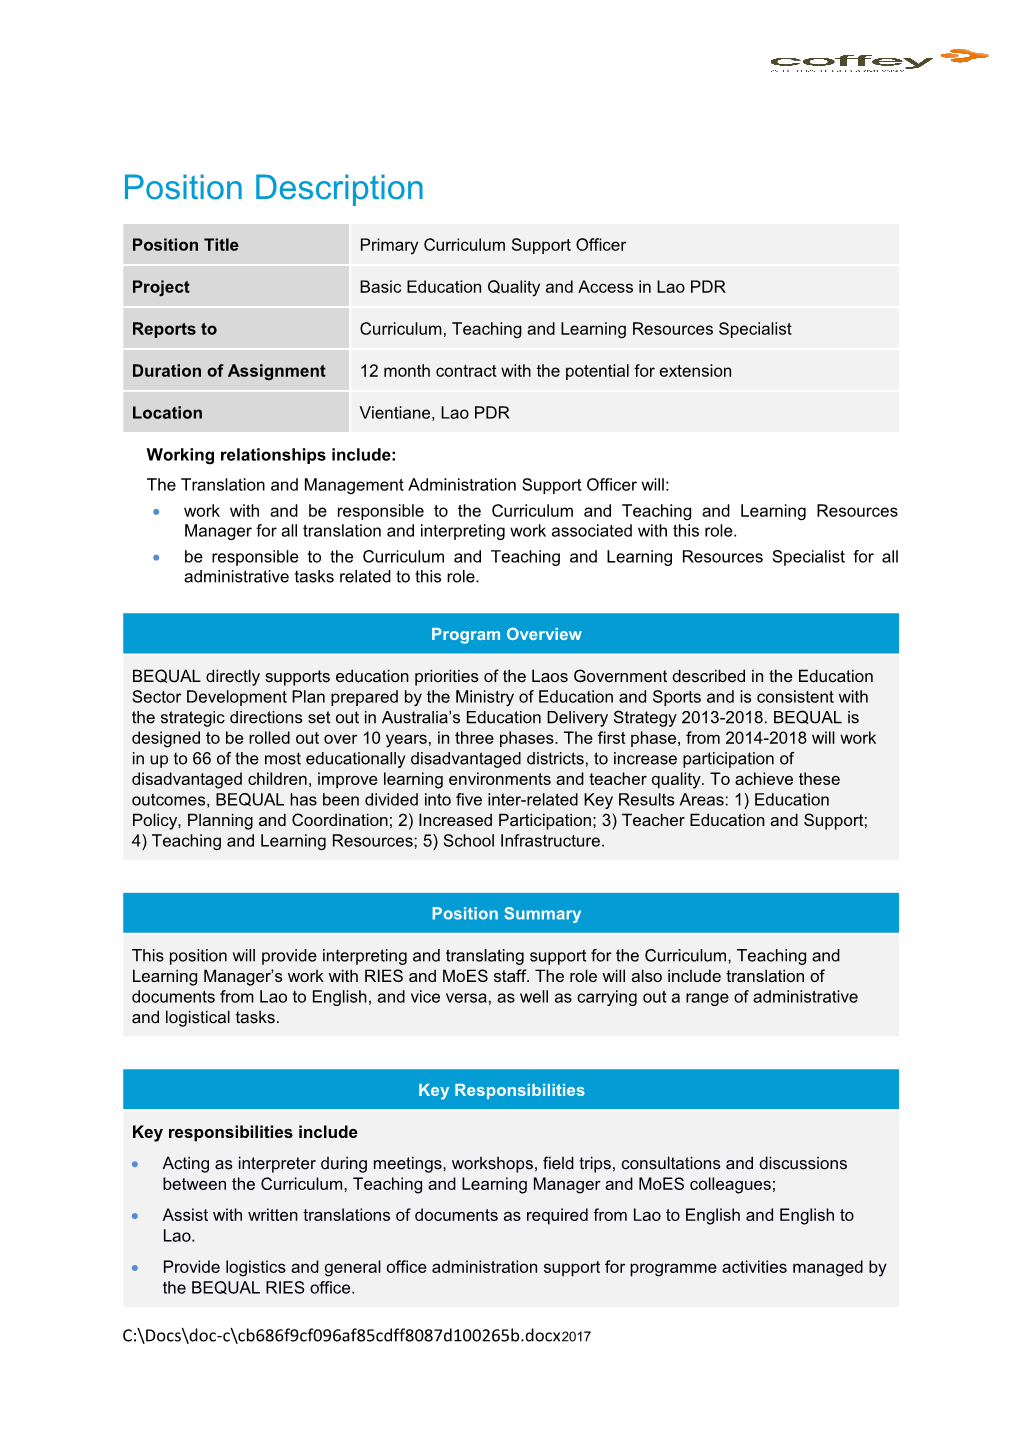 IDEVAPAC Template - Job and Person Specification ARF